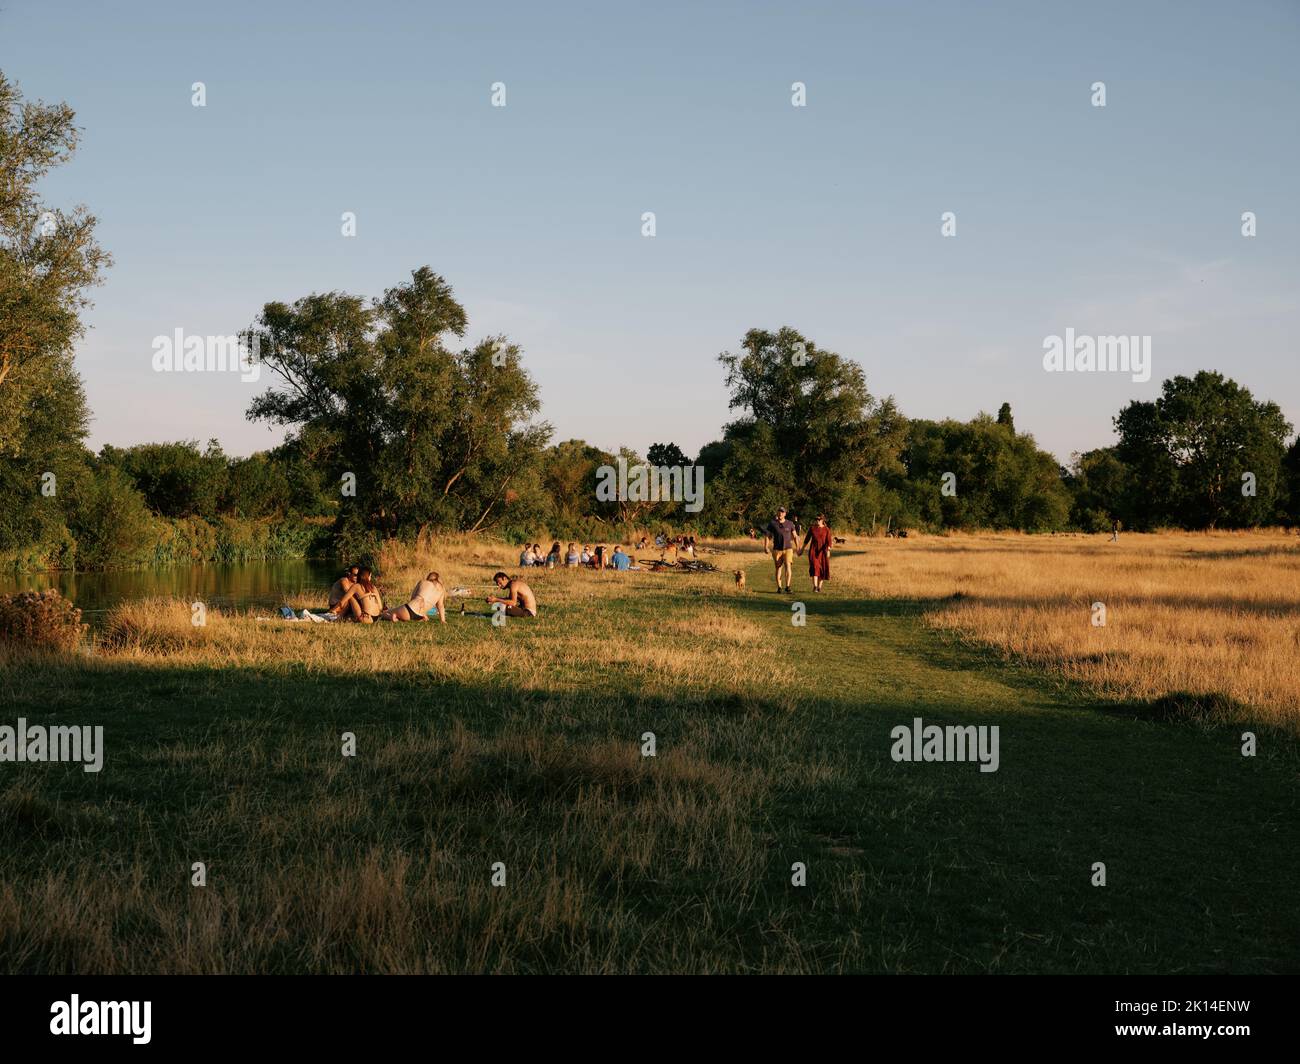 Summer life and evening light on Grantchester Meadows on the River Cam in Cambridge Cambridgeshire England UK - summertime countryside people Stock Photo